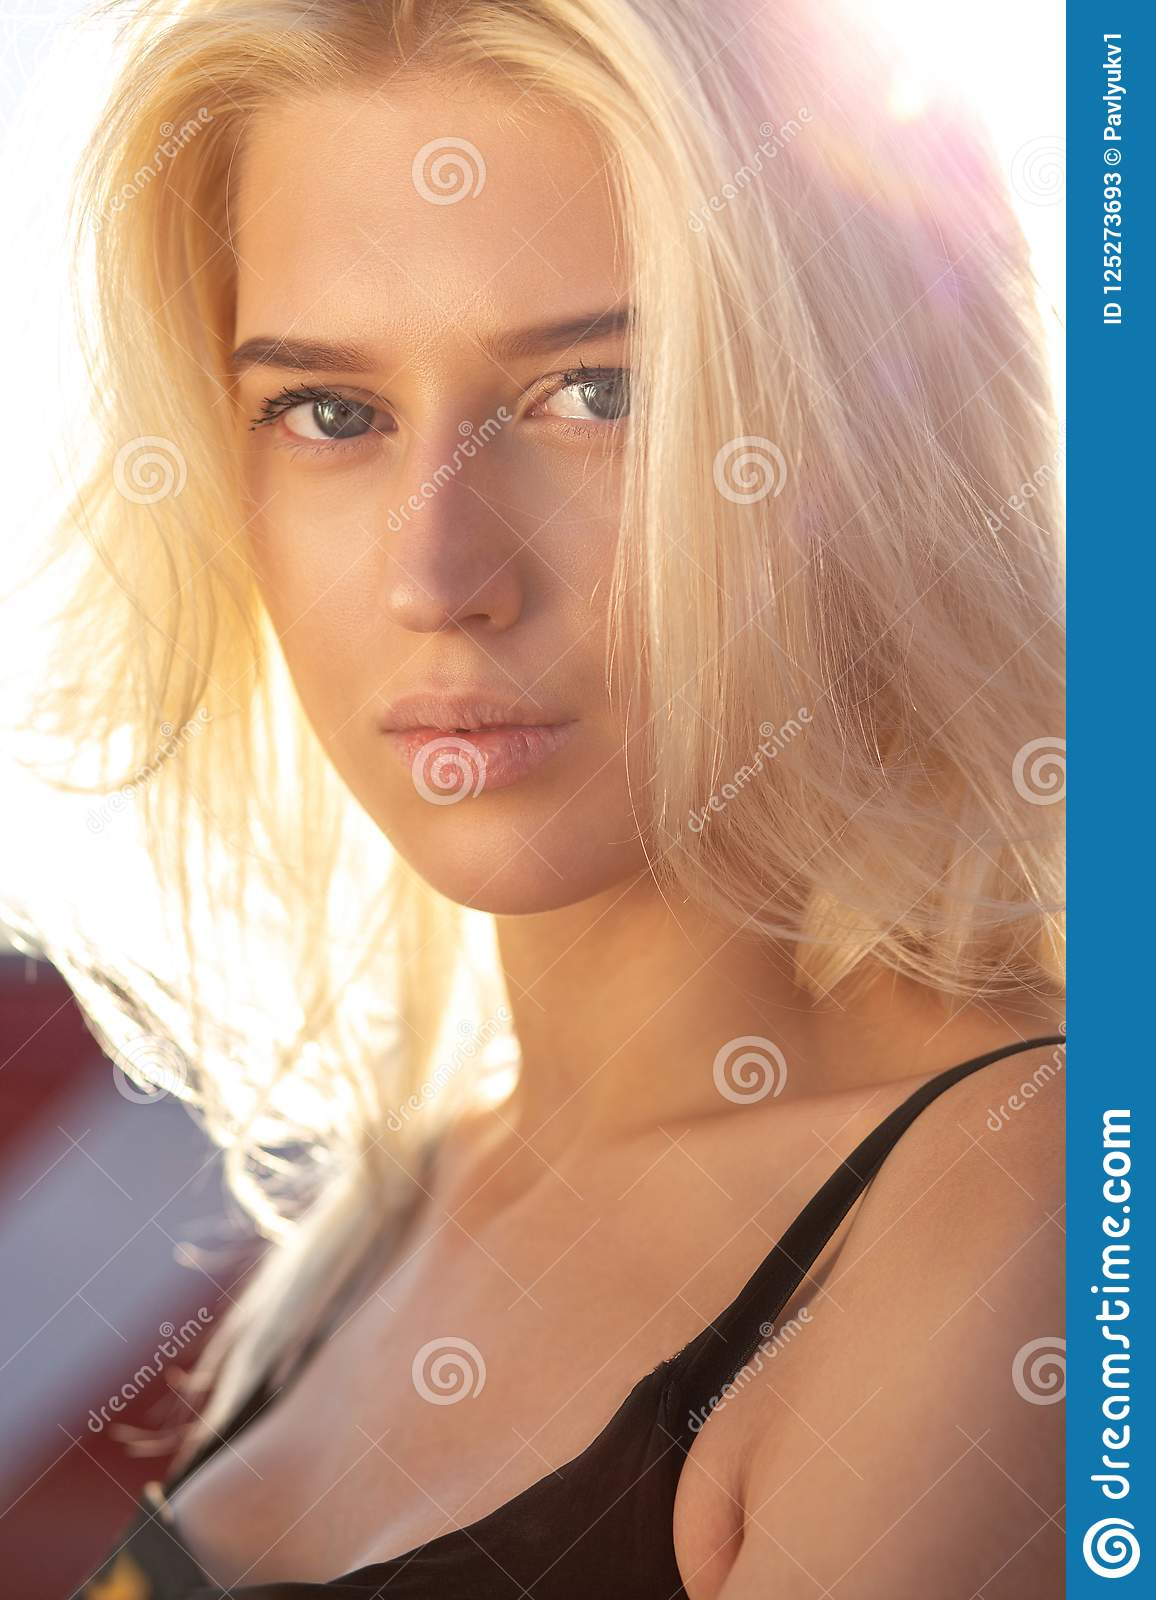 Makeup For Blondes With Blue Eyes Tender Blonde Blue Eyed Model With Natural Makeup And Hair Look